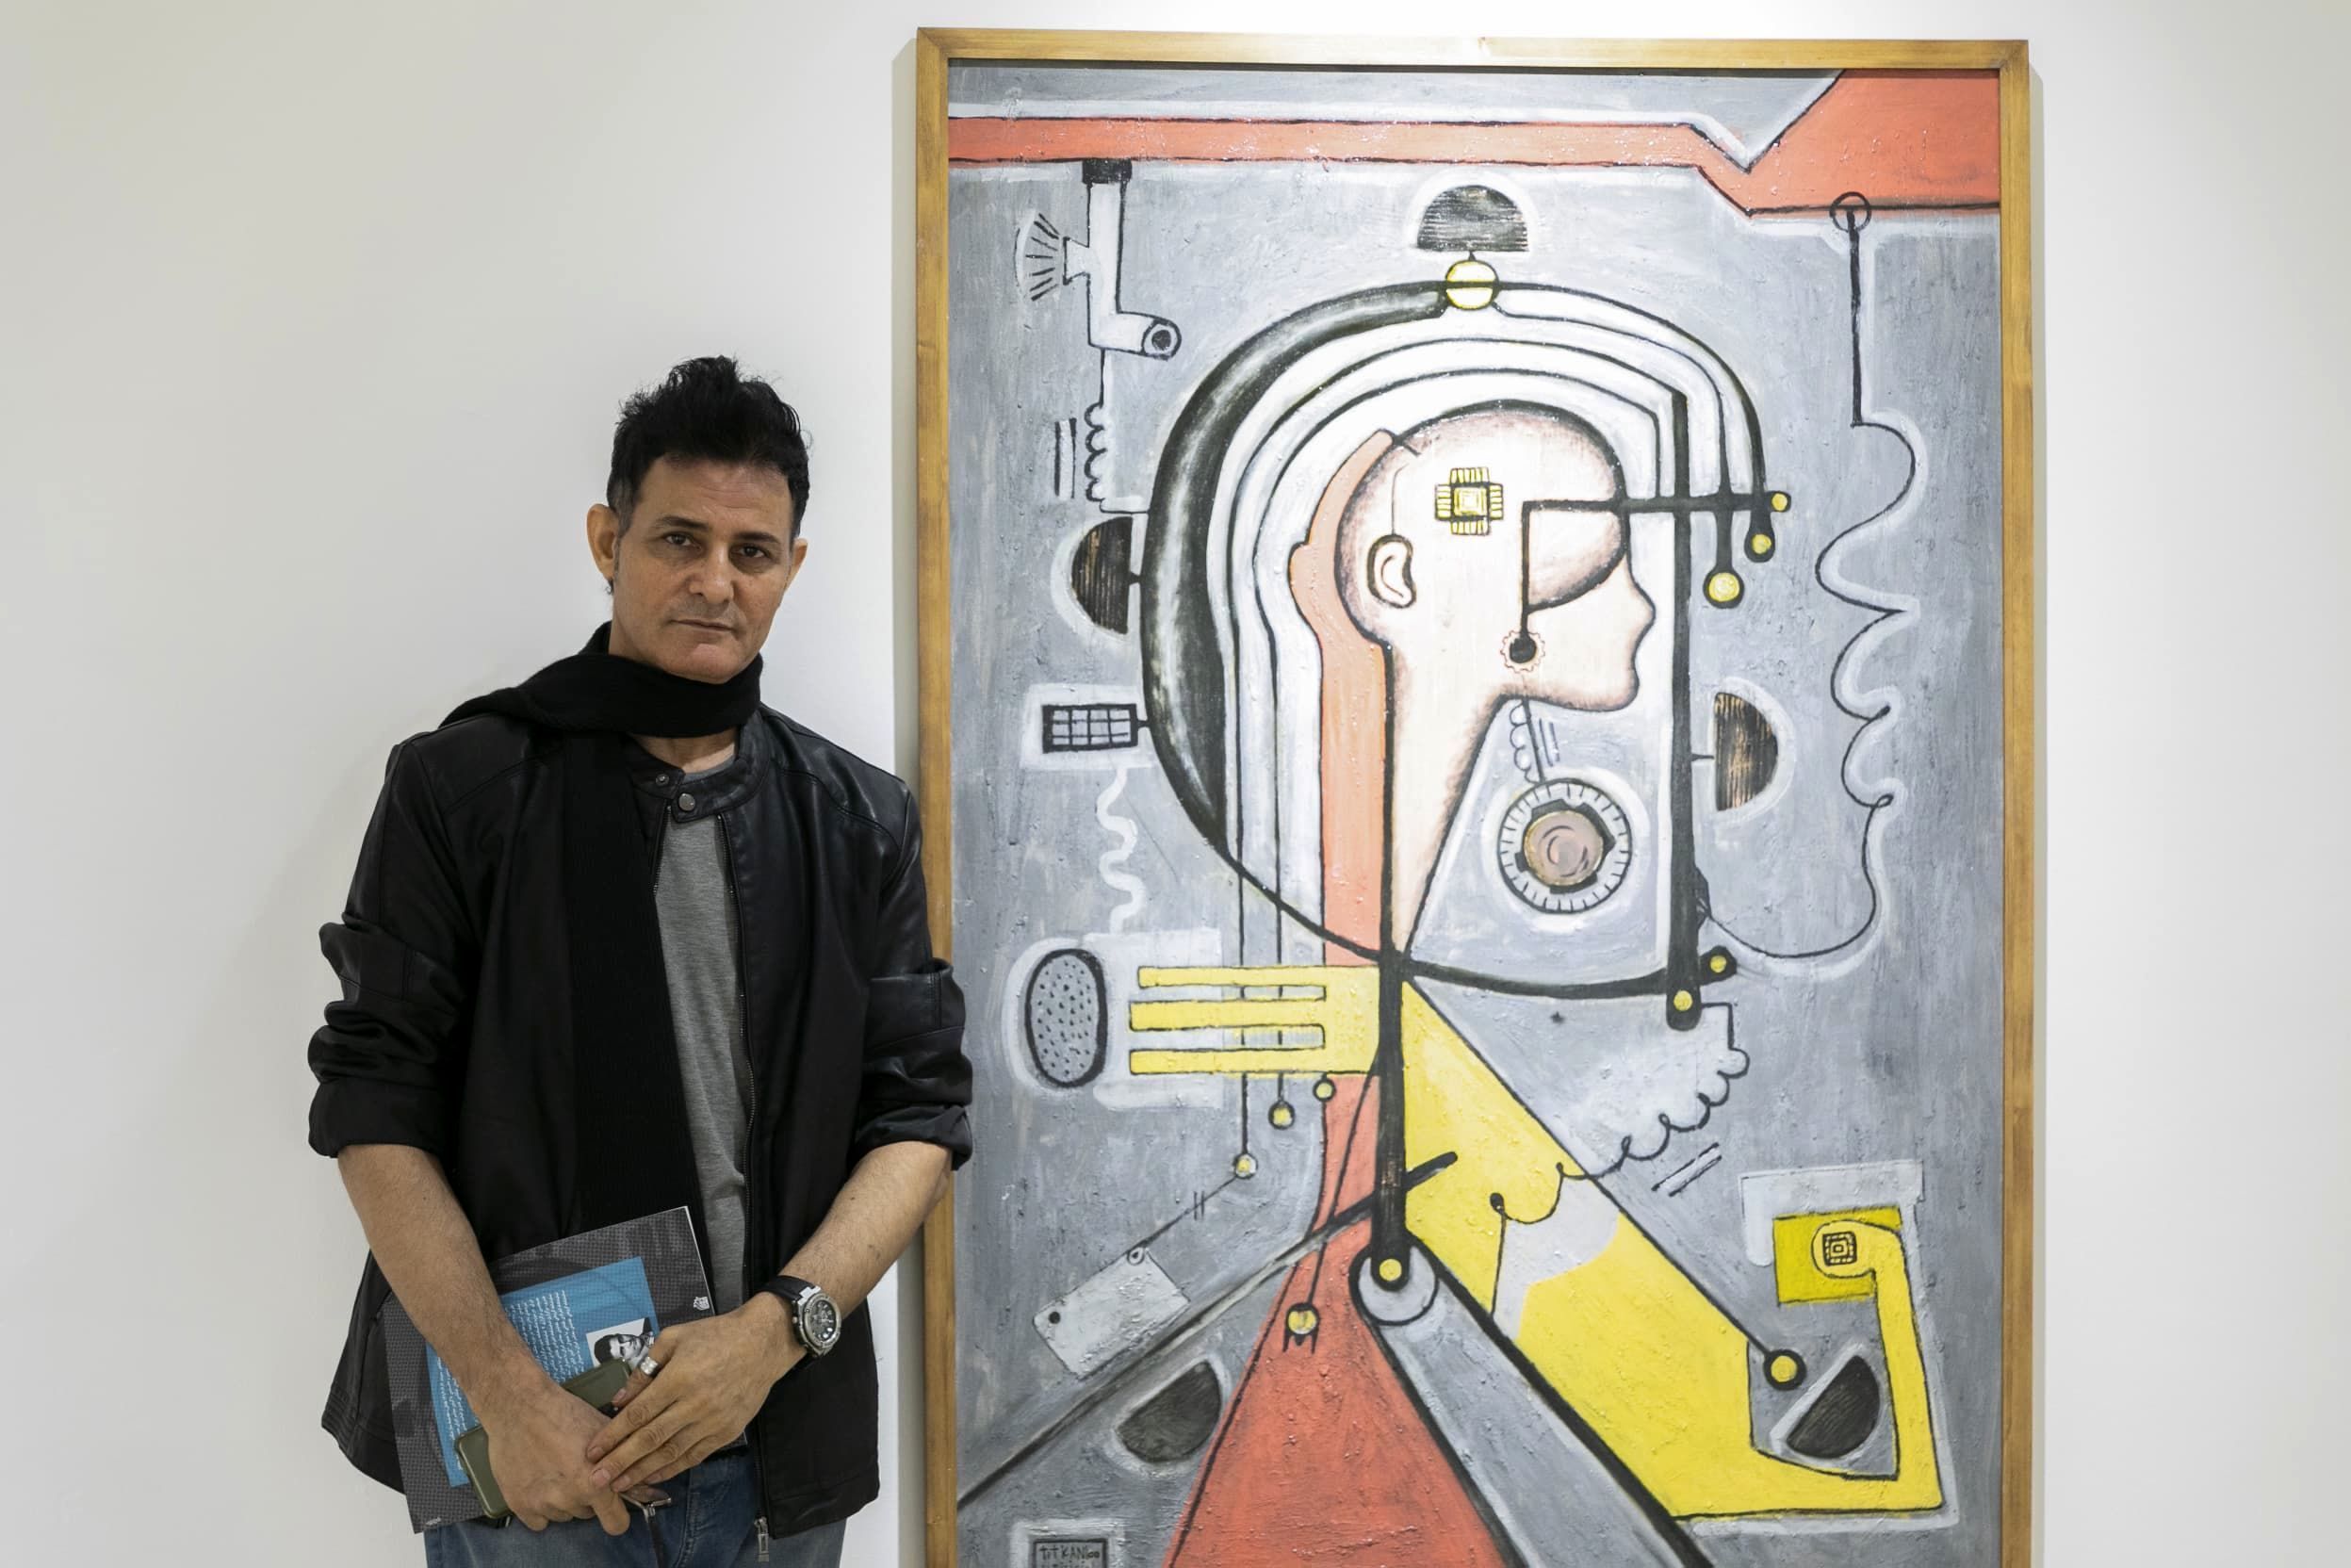 Mohammad Mohammadzadeh Titkanloo with "Artificial Intelligence" exhibition at Maher Art Gallery